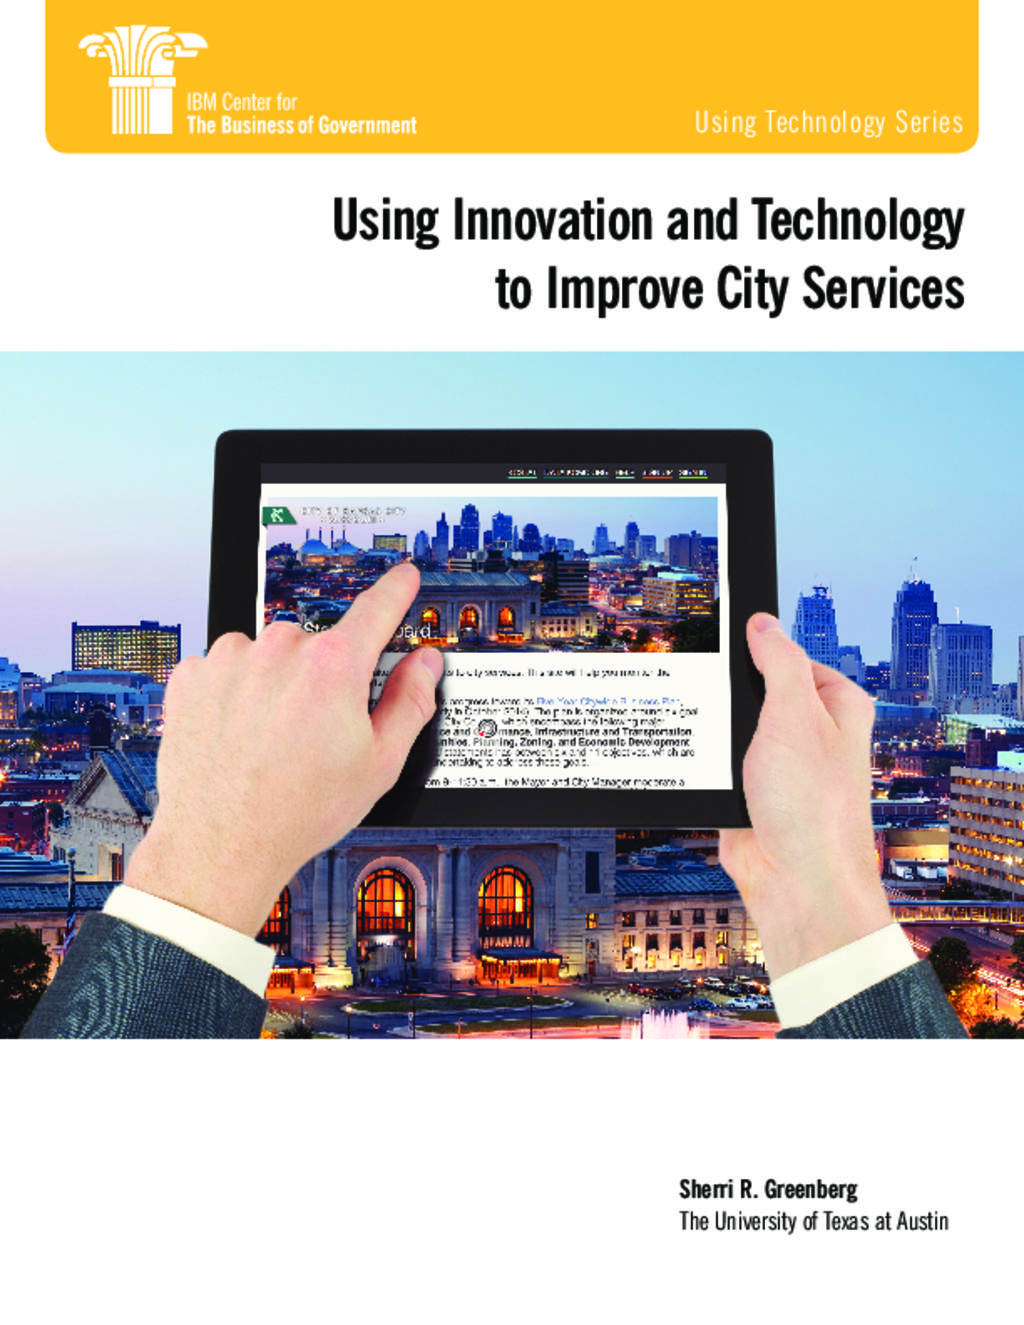 Technology for City Services